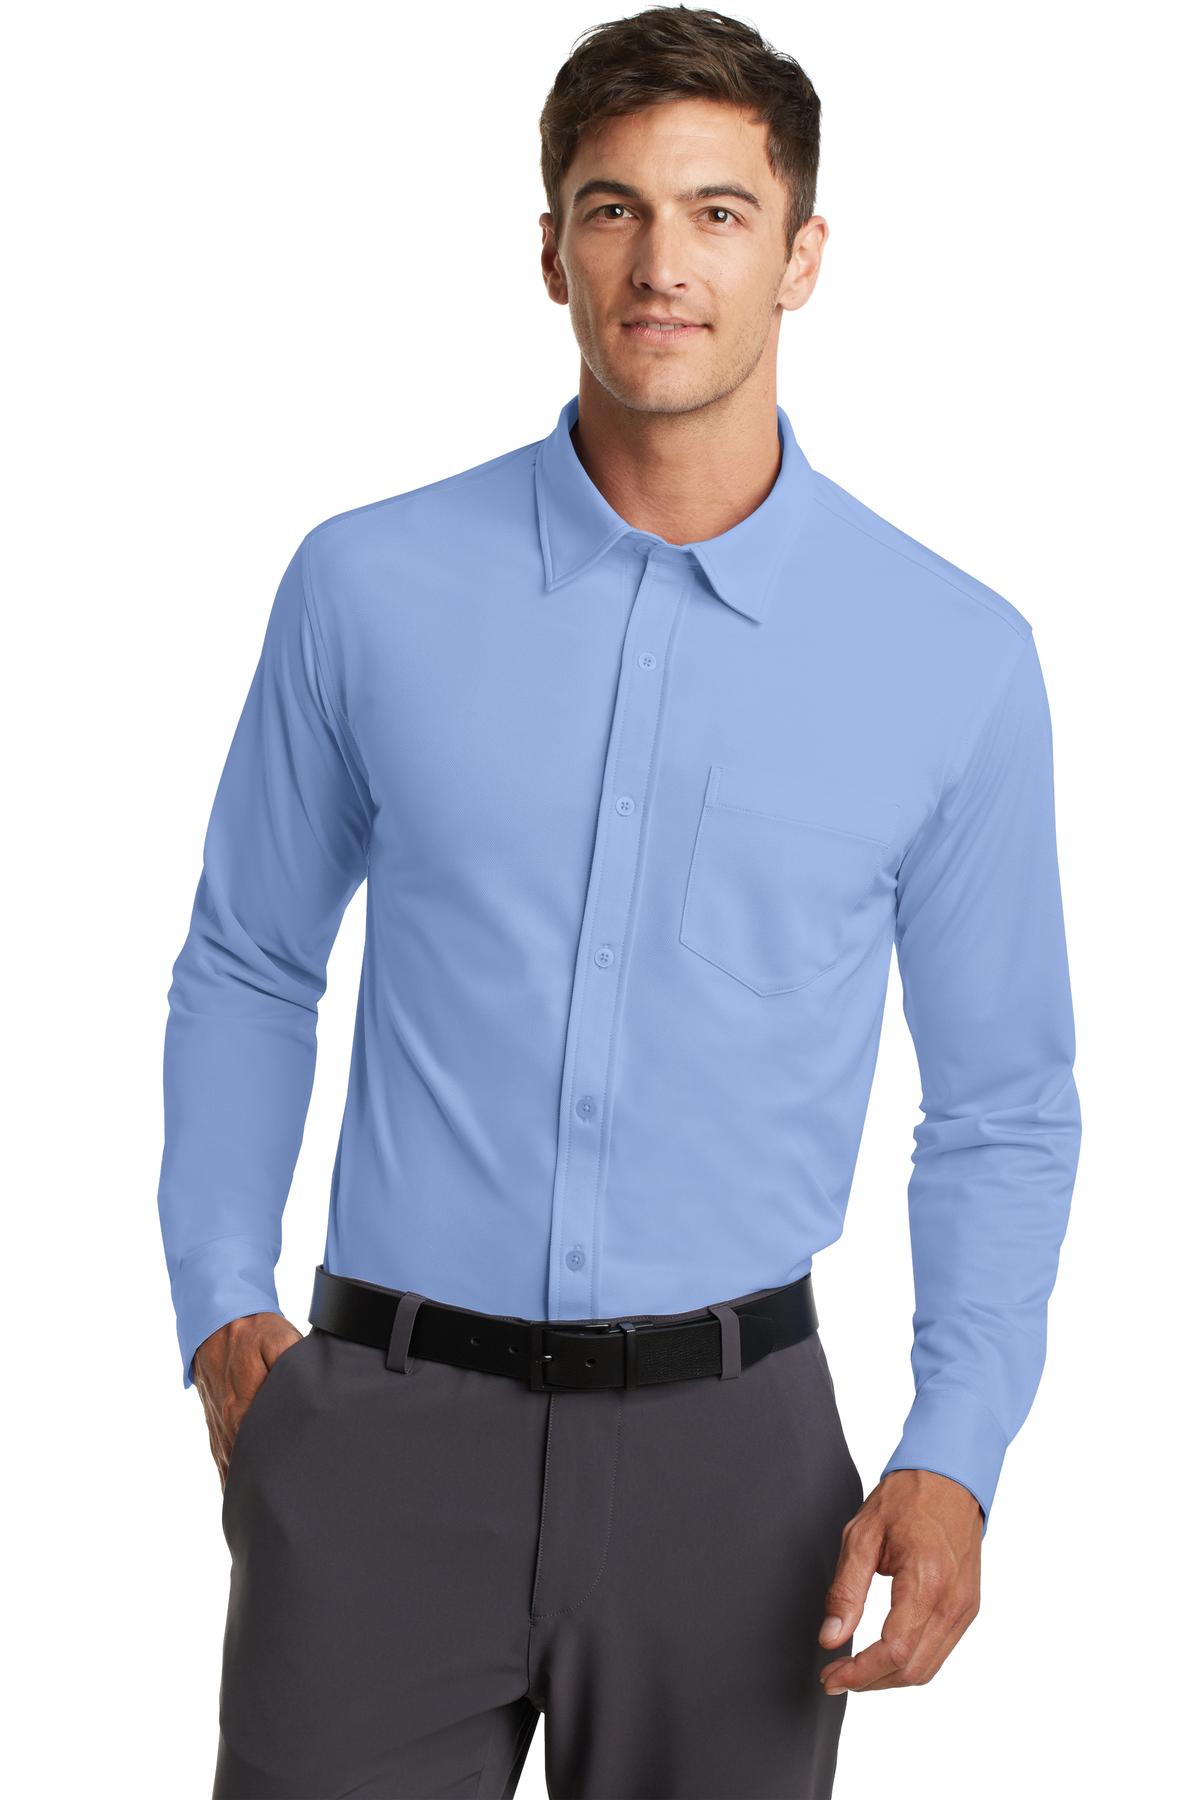 Cocktail Dress Shirt Factory Price, 45% OFF | deliciousgreek.ca